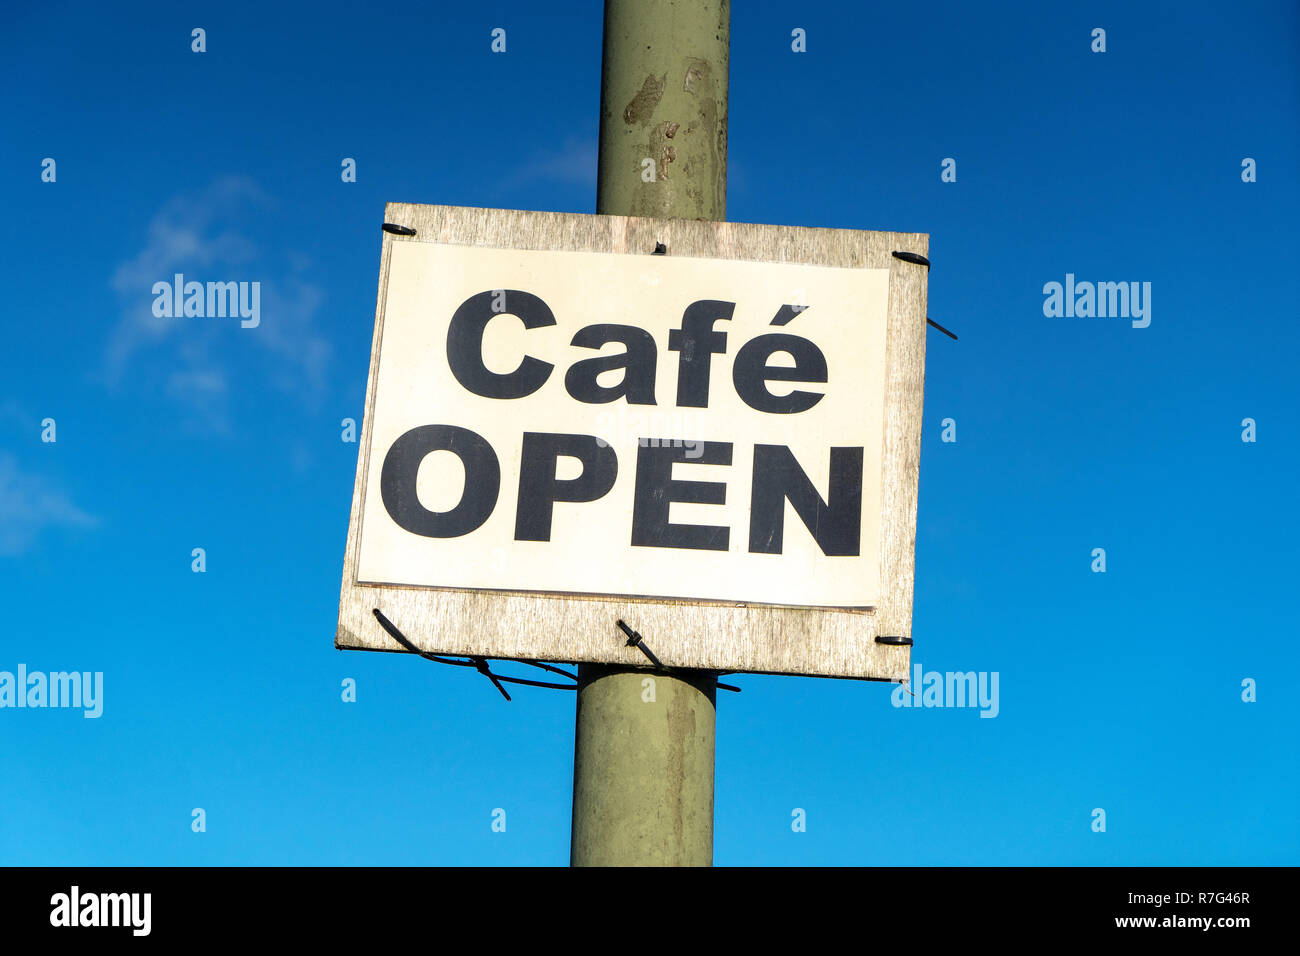 Cafe open sign on metal post against blue sky Stock Photo